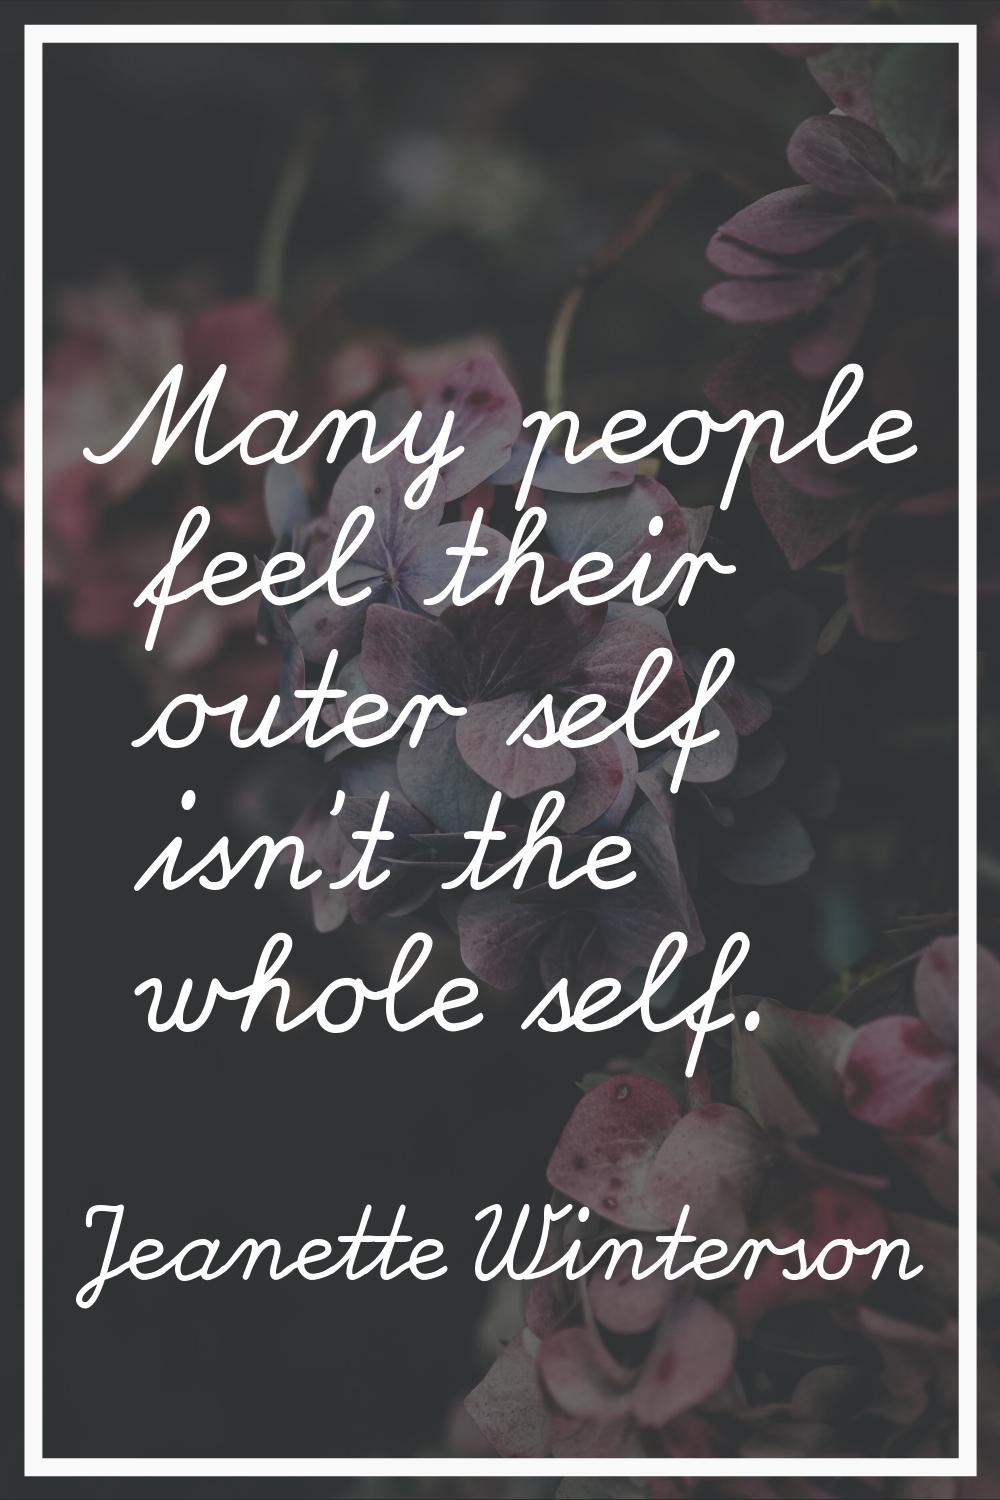 Many people feel their outer self isn't the whole self.